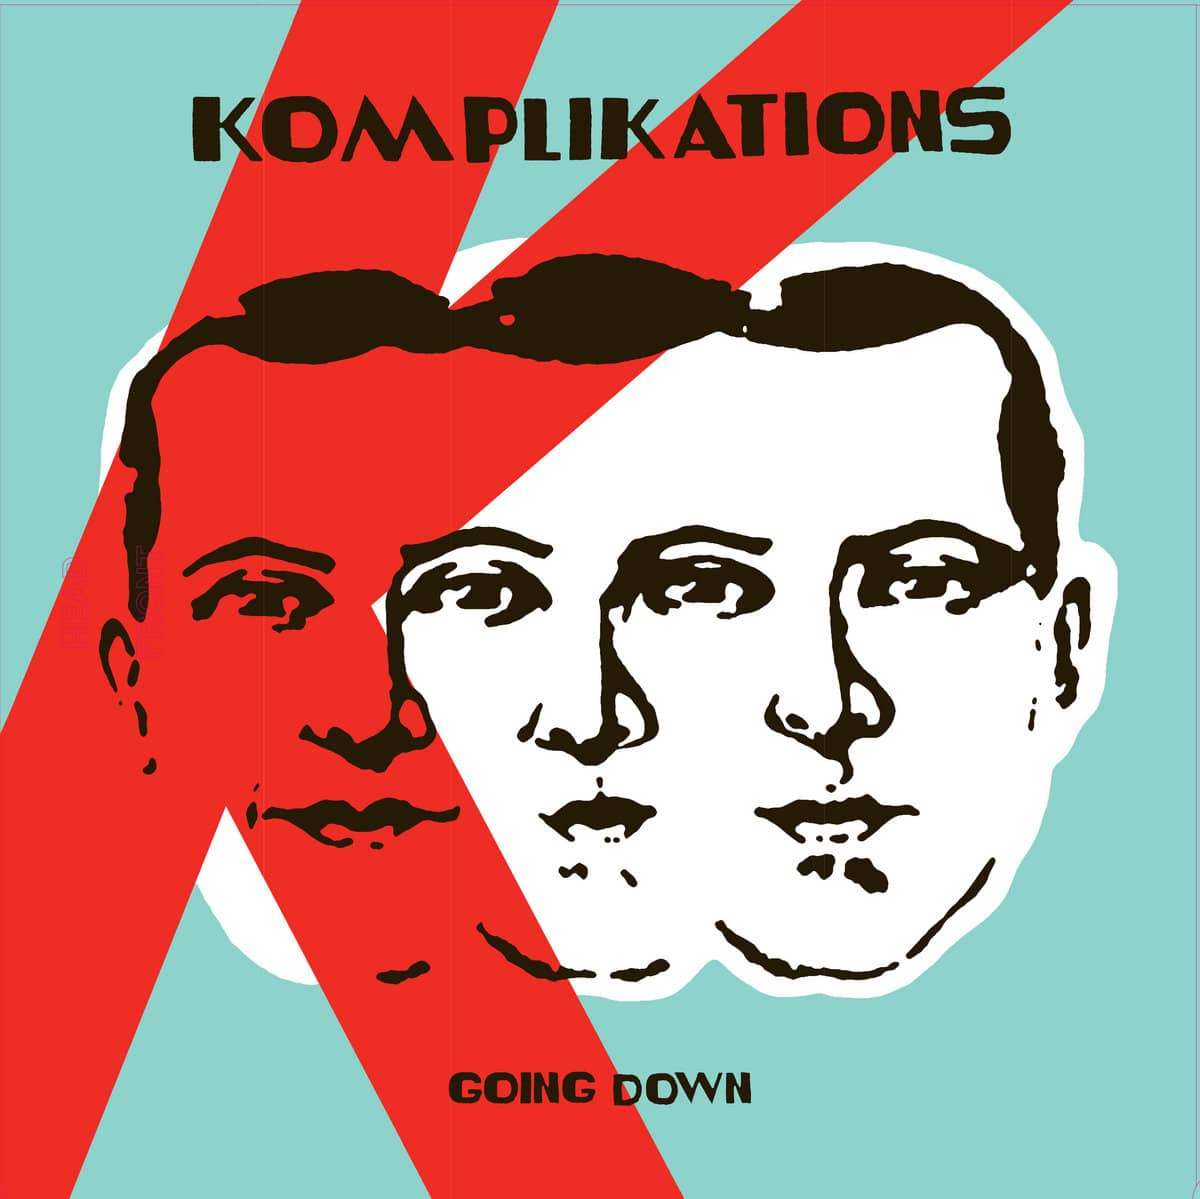 Komplikations – going down Cover